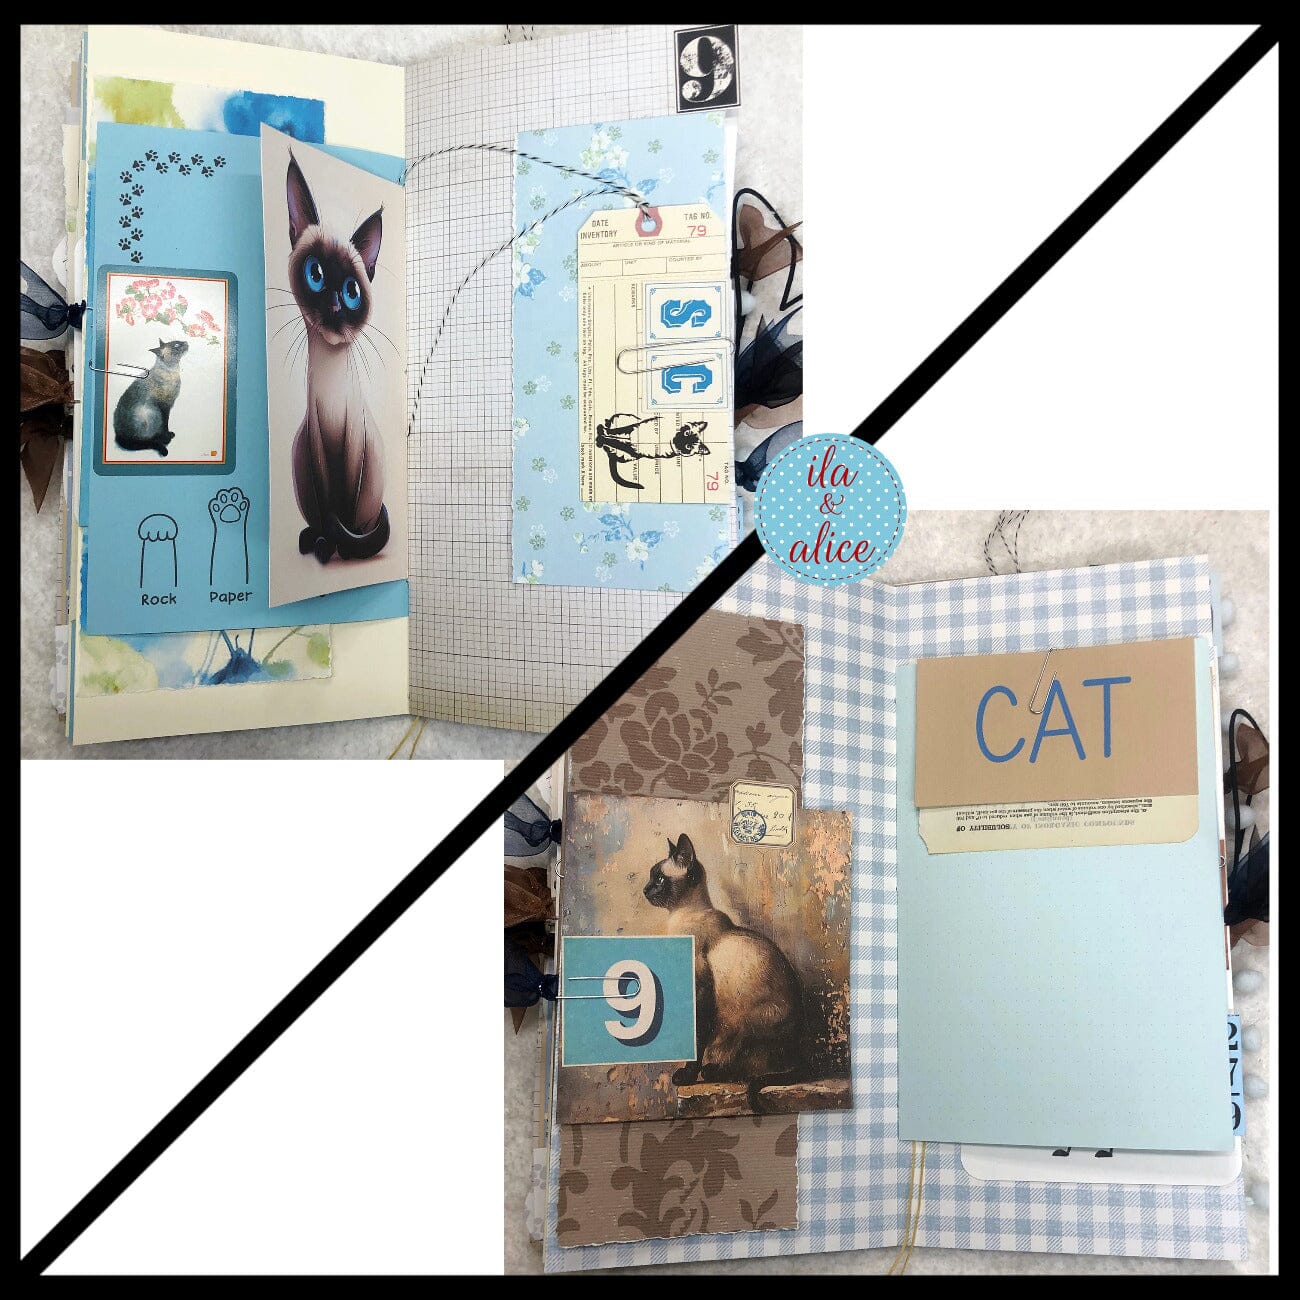 Siamese Cat Junk Journal- Soft Cover with Side View Journal ila & alice 